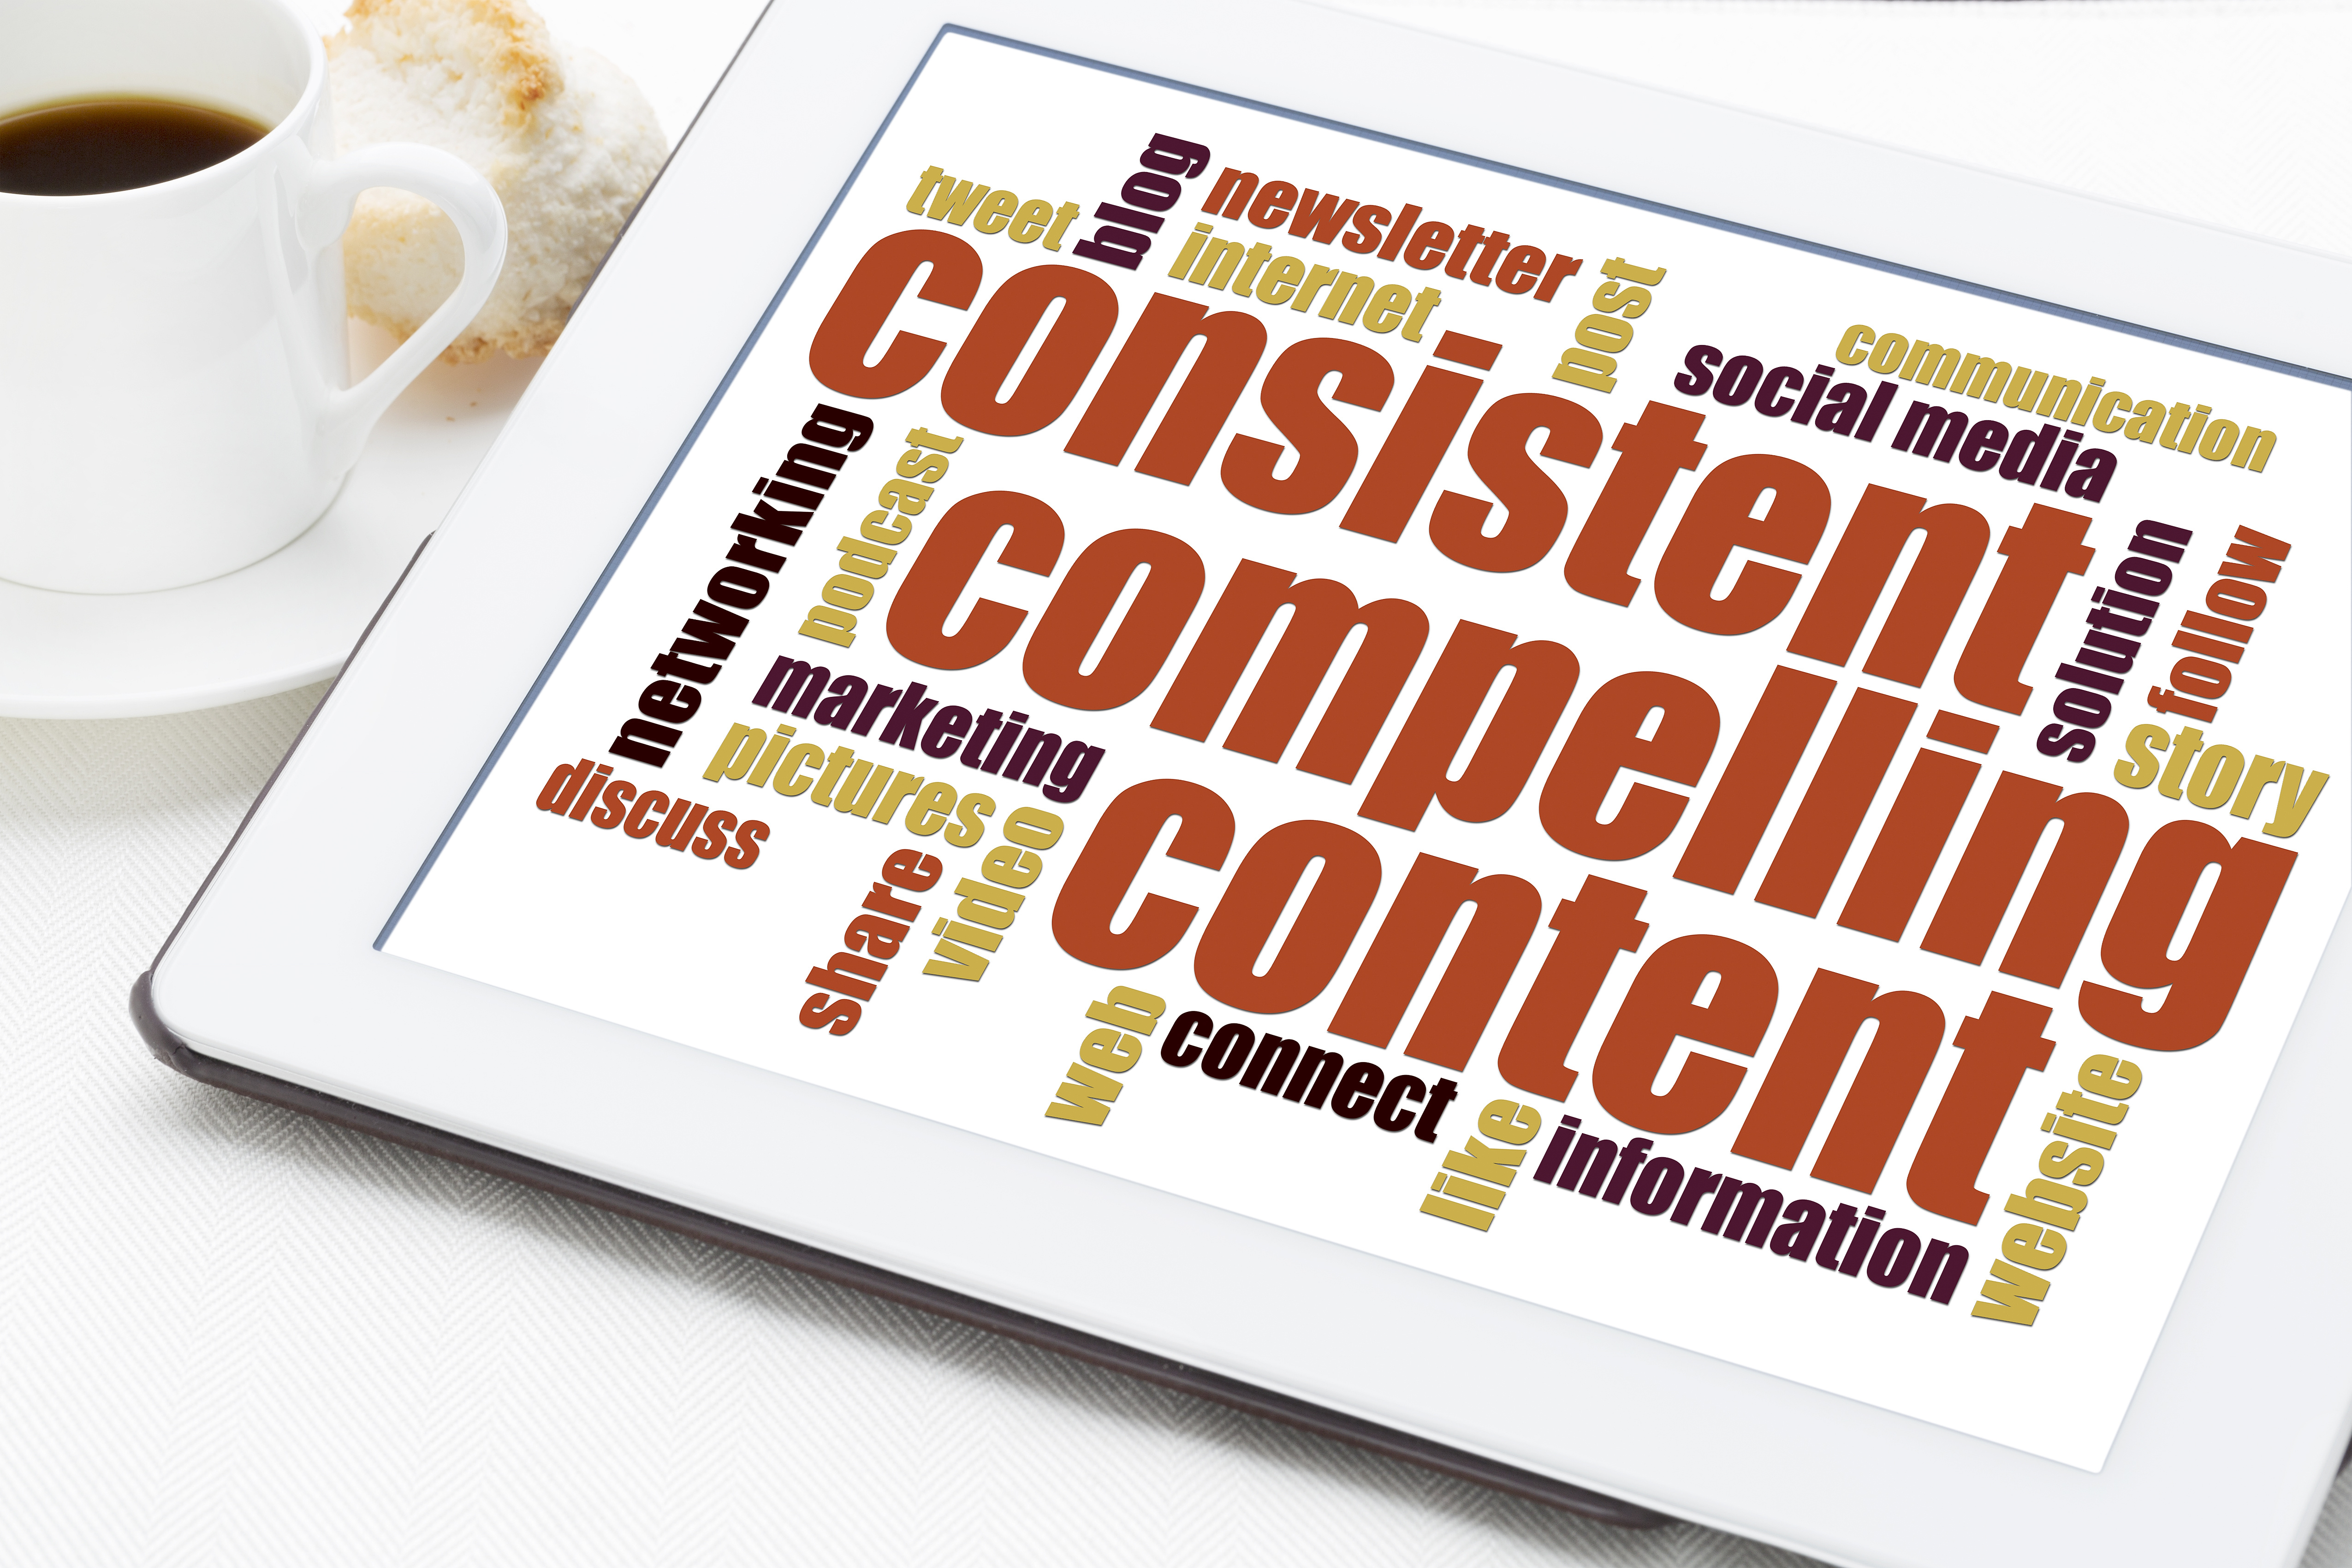 consistent, compelling content - a word cloud on a digital tablet